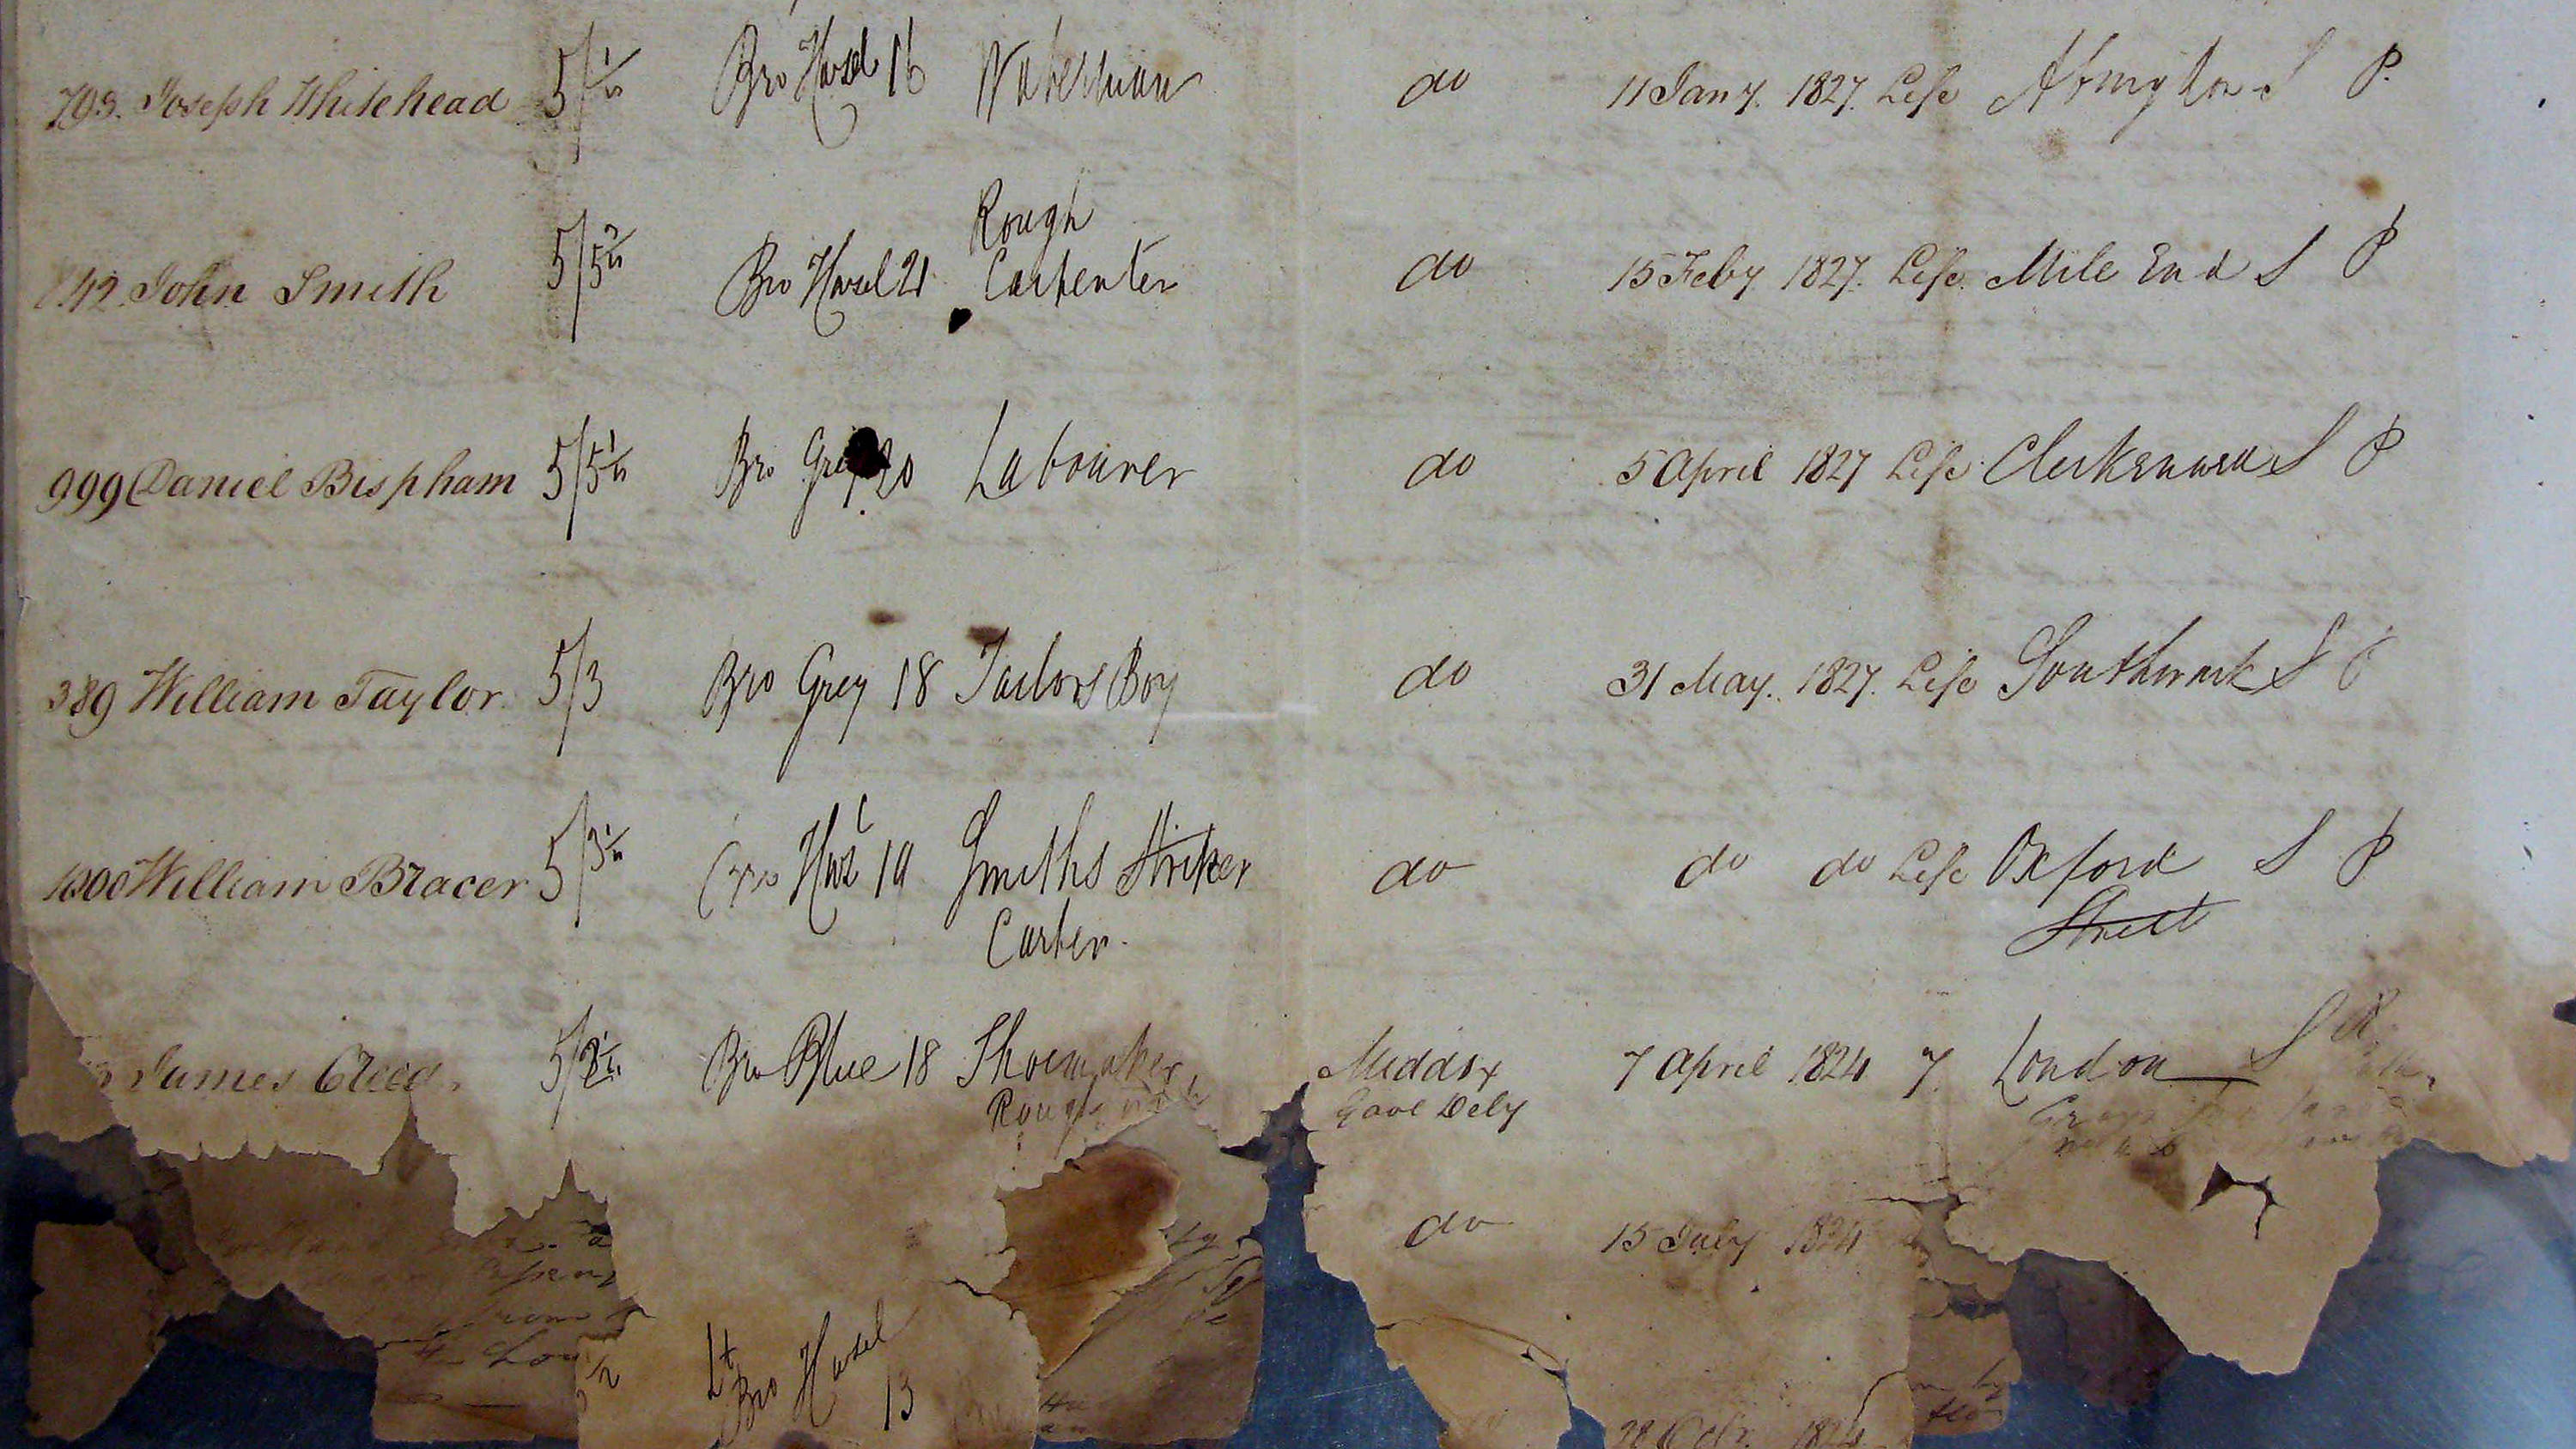 Excerpt from ledgers held as part of Brickendon Estate’s archives mentioning William Bracer.